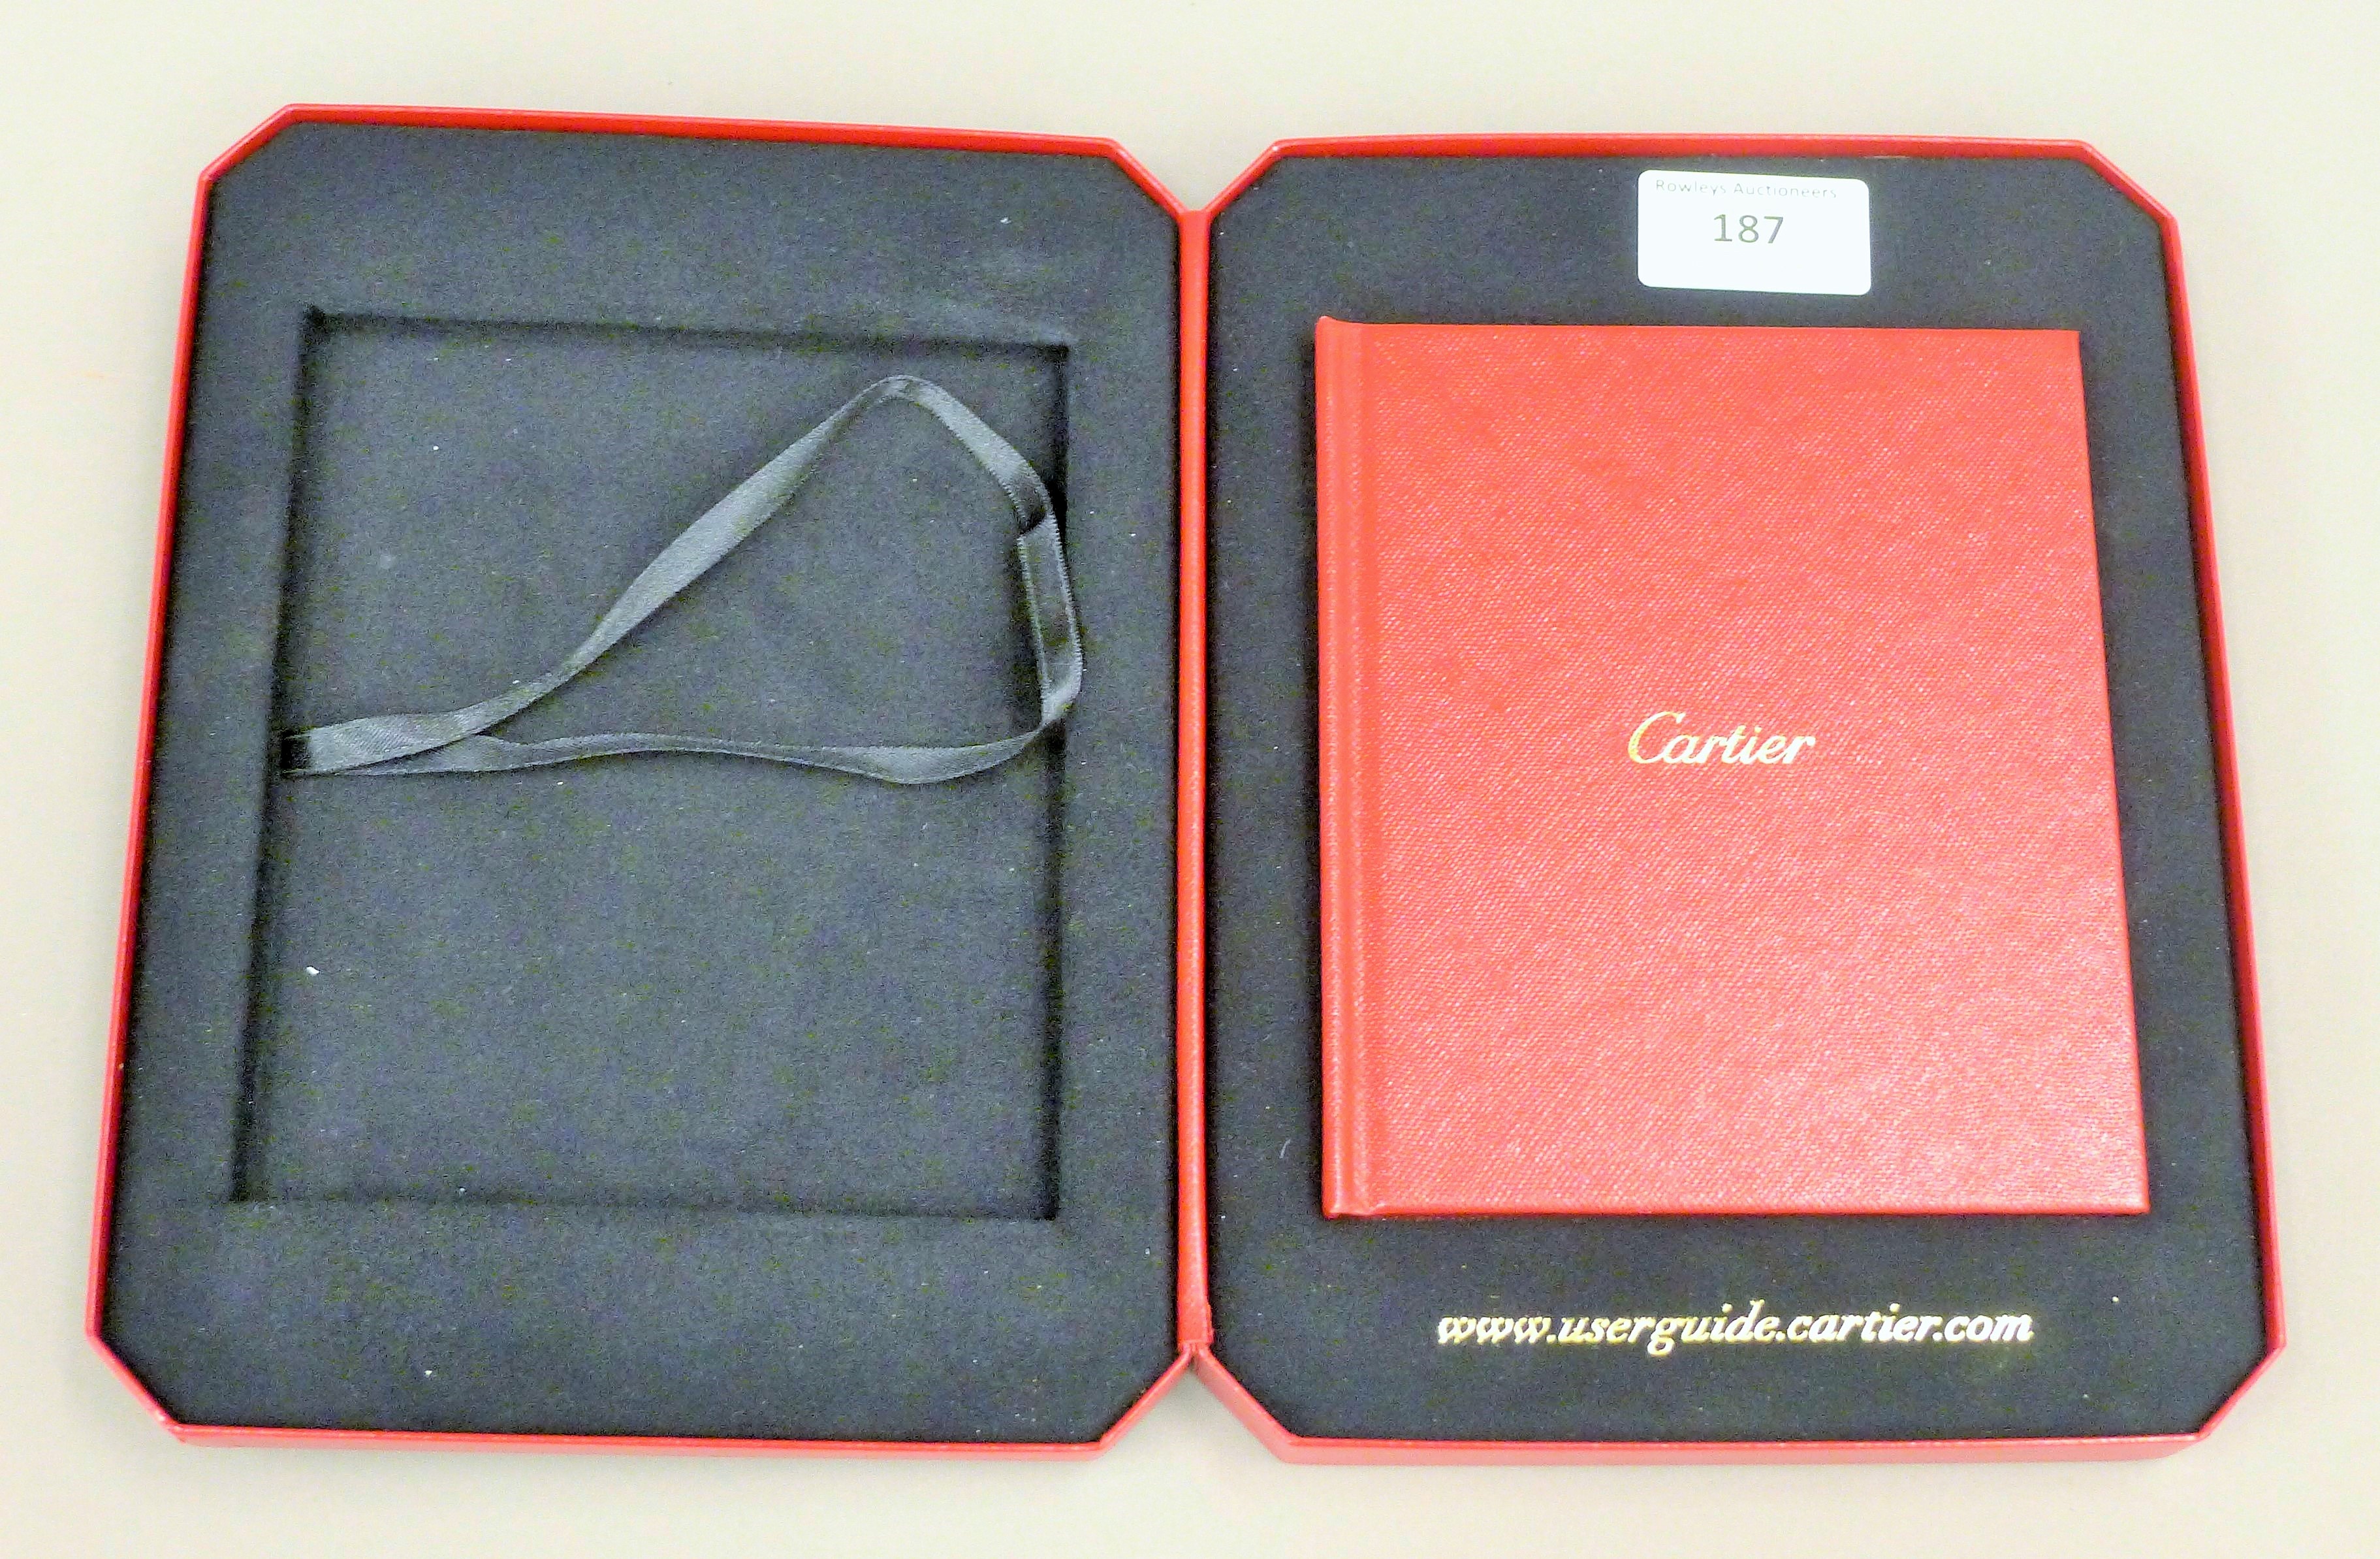 A Cartier watch user guide booklet in box. - Image 2 of 2